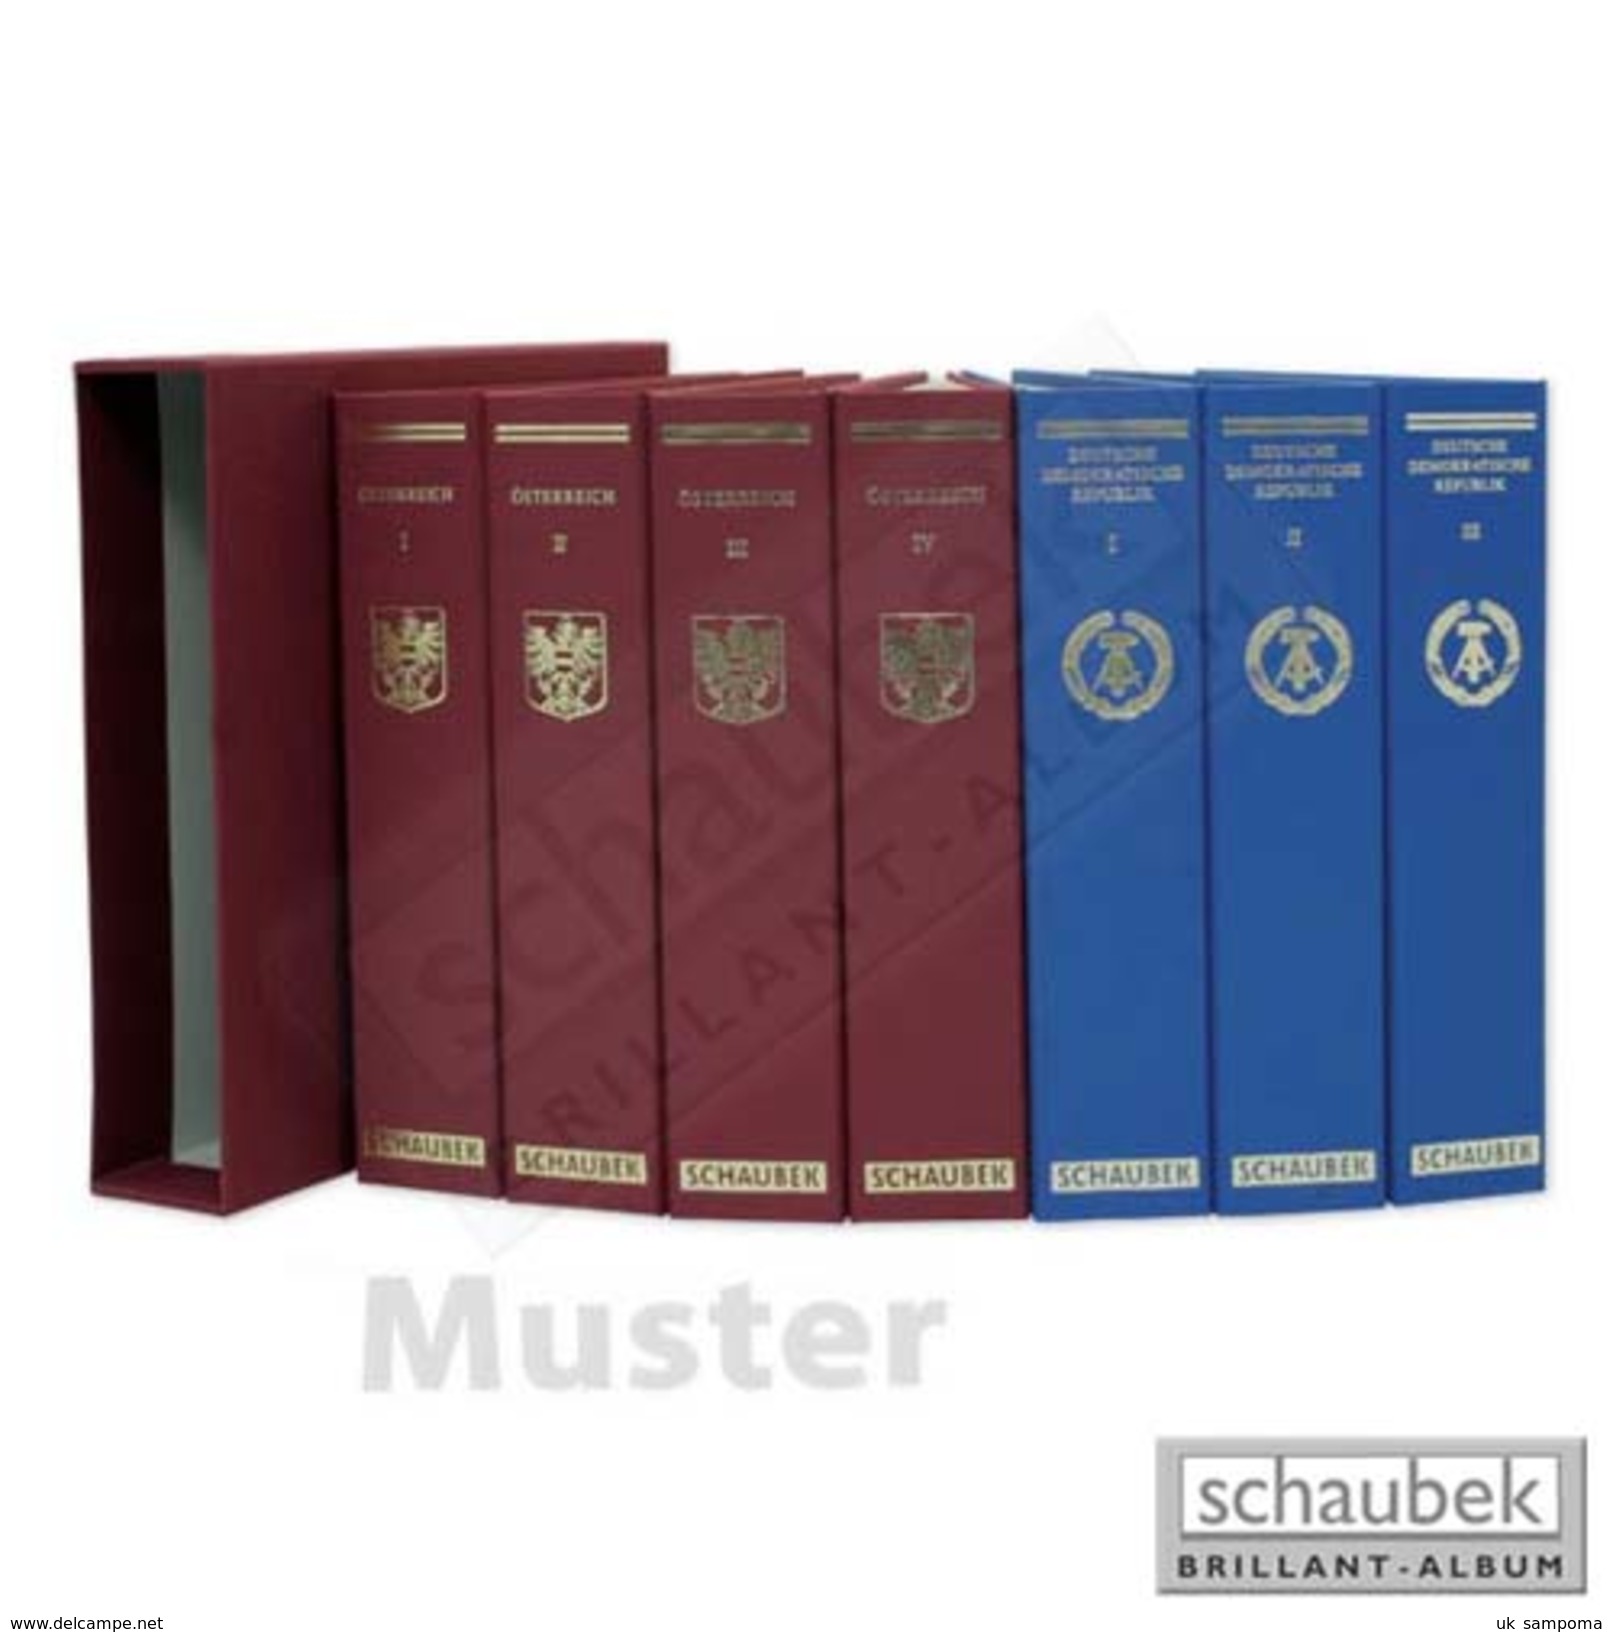 Schaubek A-822/03N Album Hungary 1960-1969 Standard, In A Blue Screw Post Binder, Vol. III, Without Slipcase - Binders With Pages